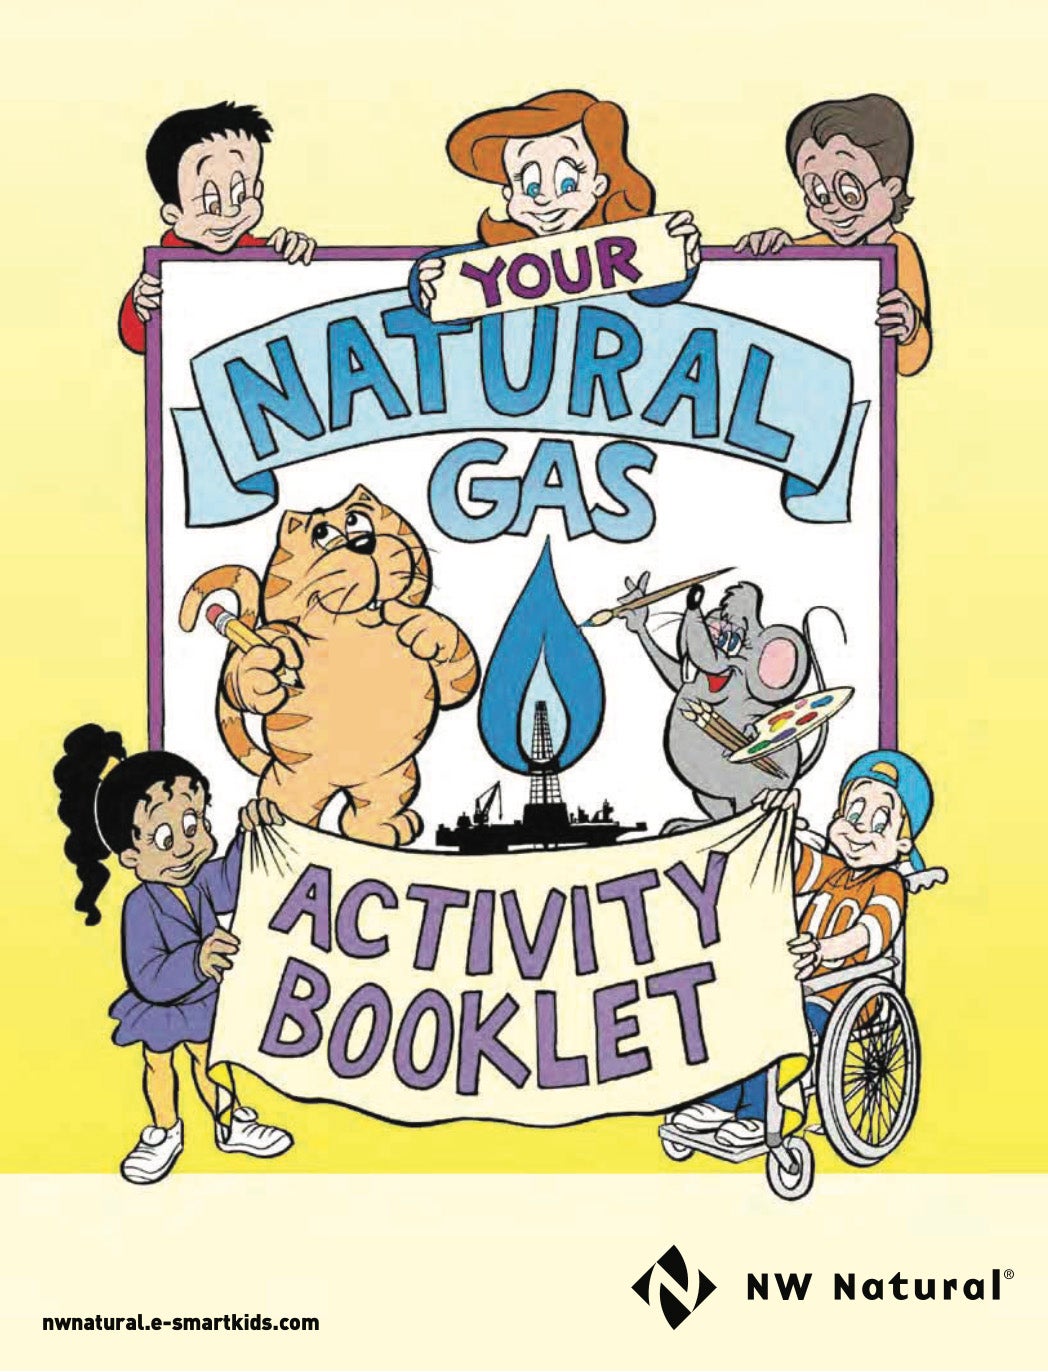 Illustrated cover featuring kids and animals.